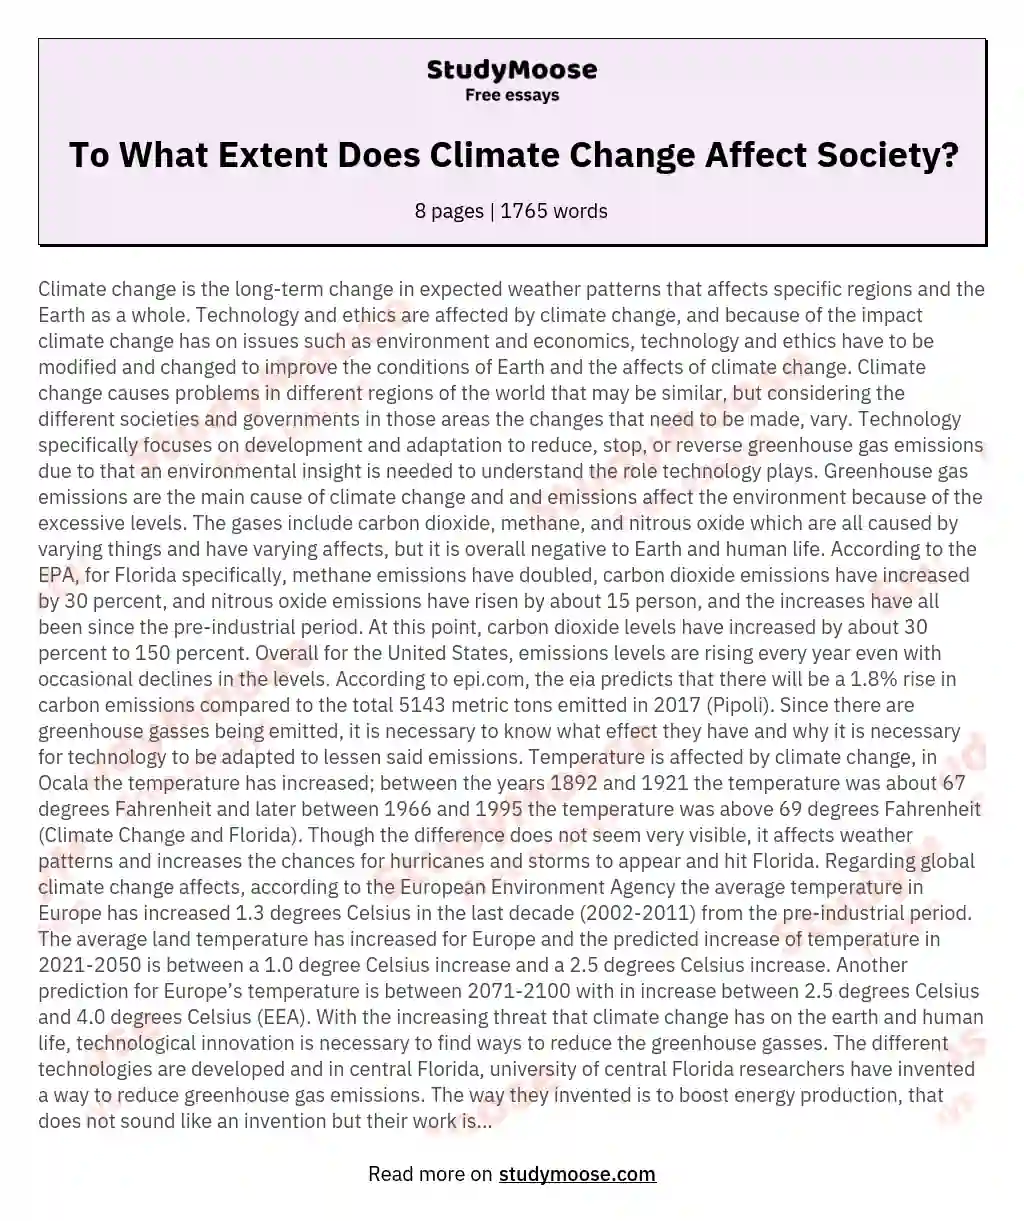 To What Extent Does Climate Change Affect Society? essay